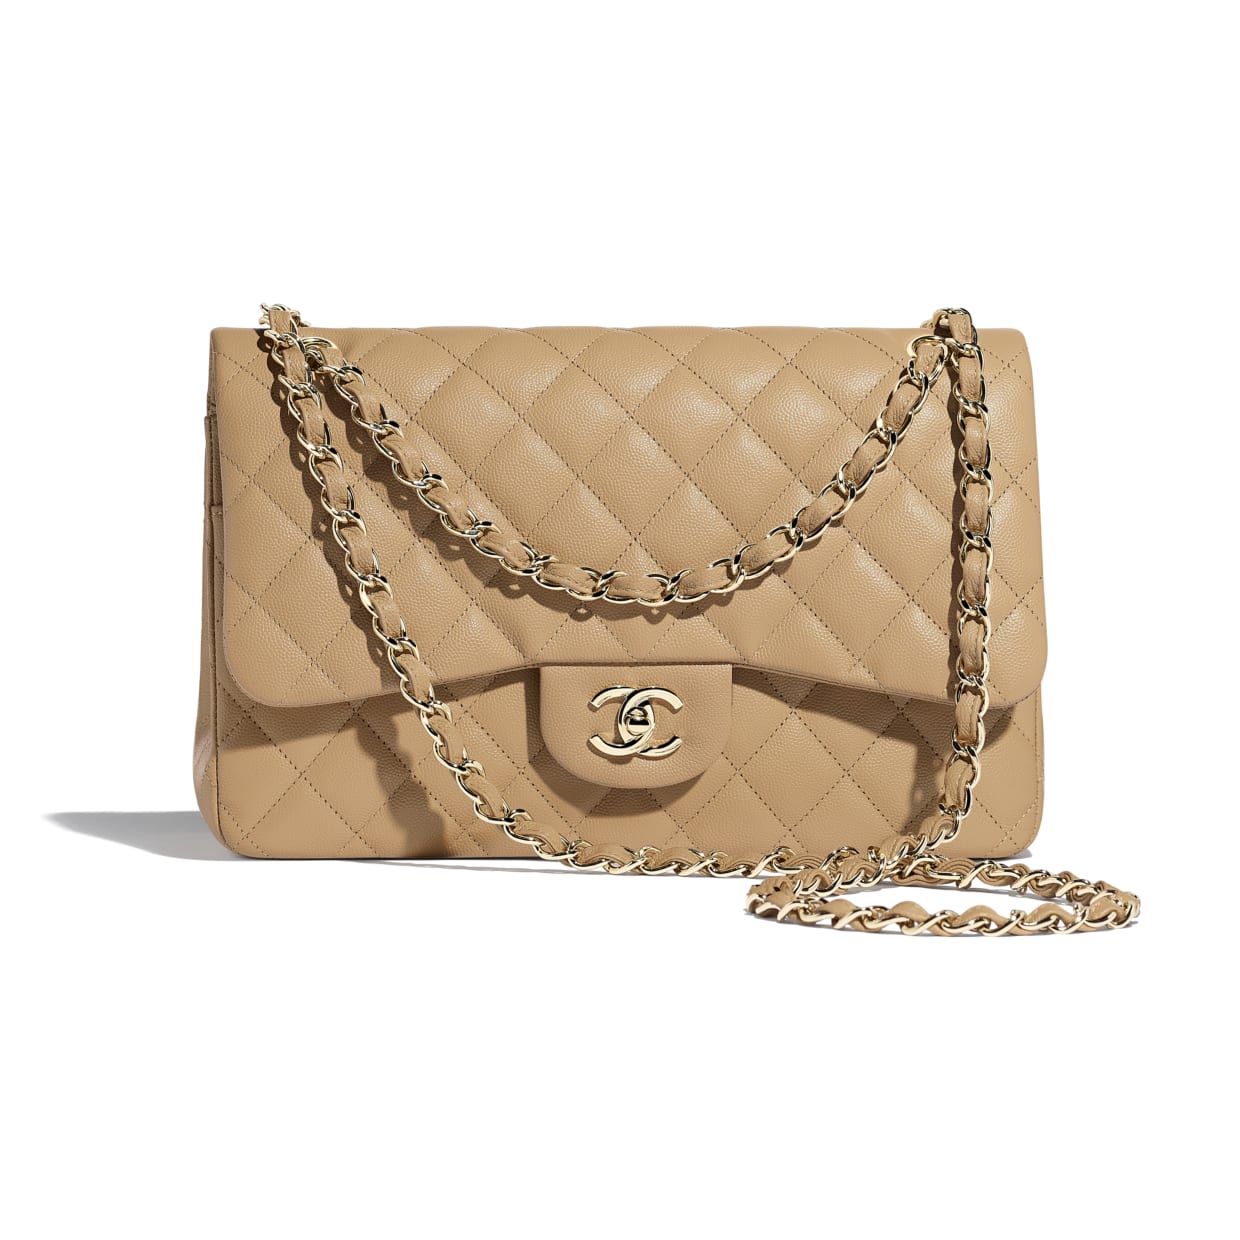 Chanel Classic Bag Price Increases Starting Nov 1, 2019 - Spotted Fashion